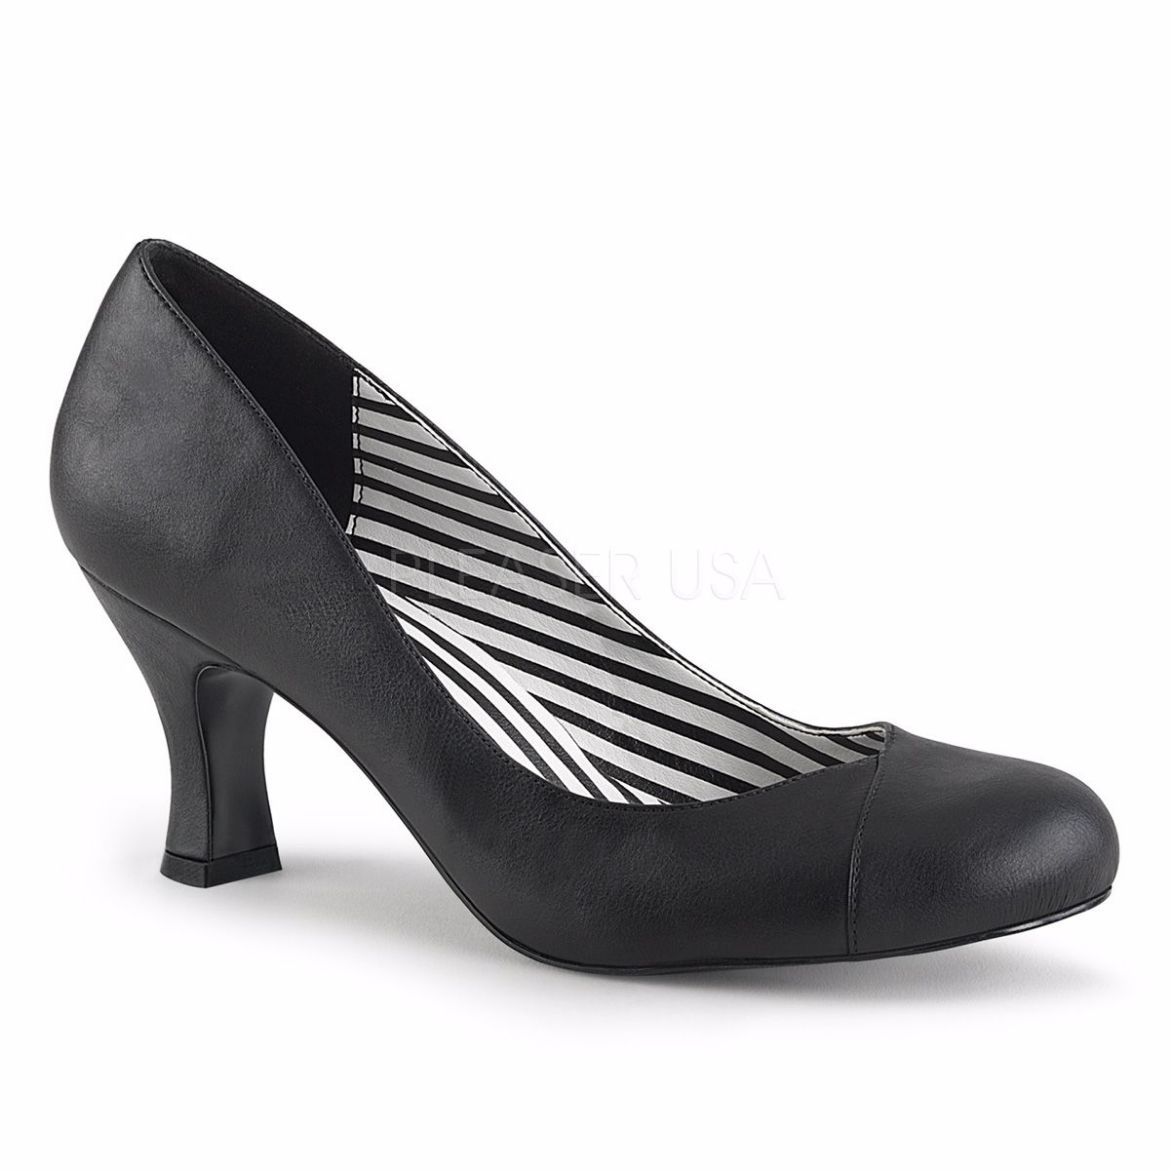 Product image of Pleaser Pink Label Jenna-01 Black Faux Leather, 3 inch (7.6 cm) Heel Court Pump Shoes